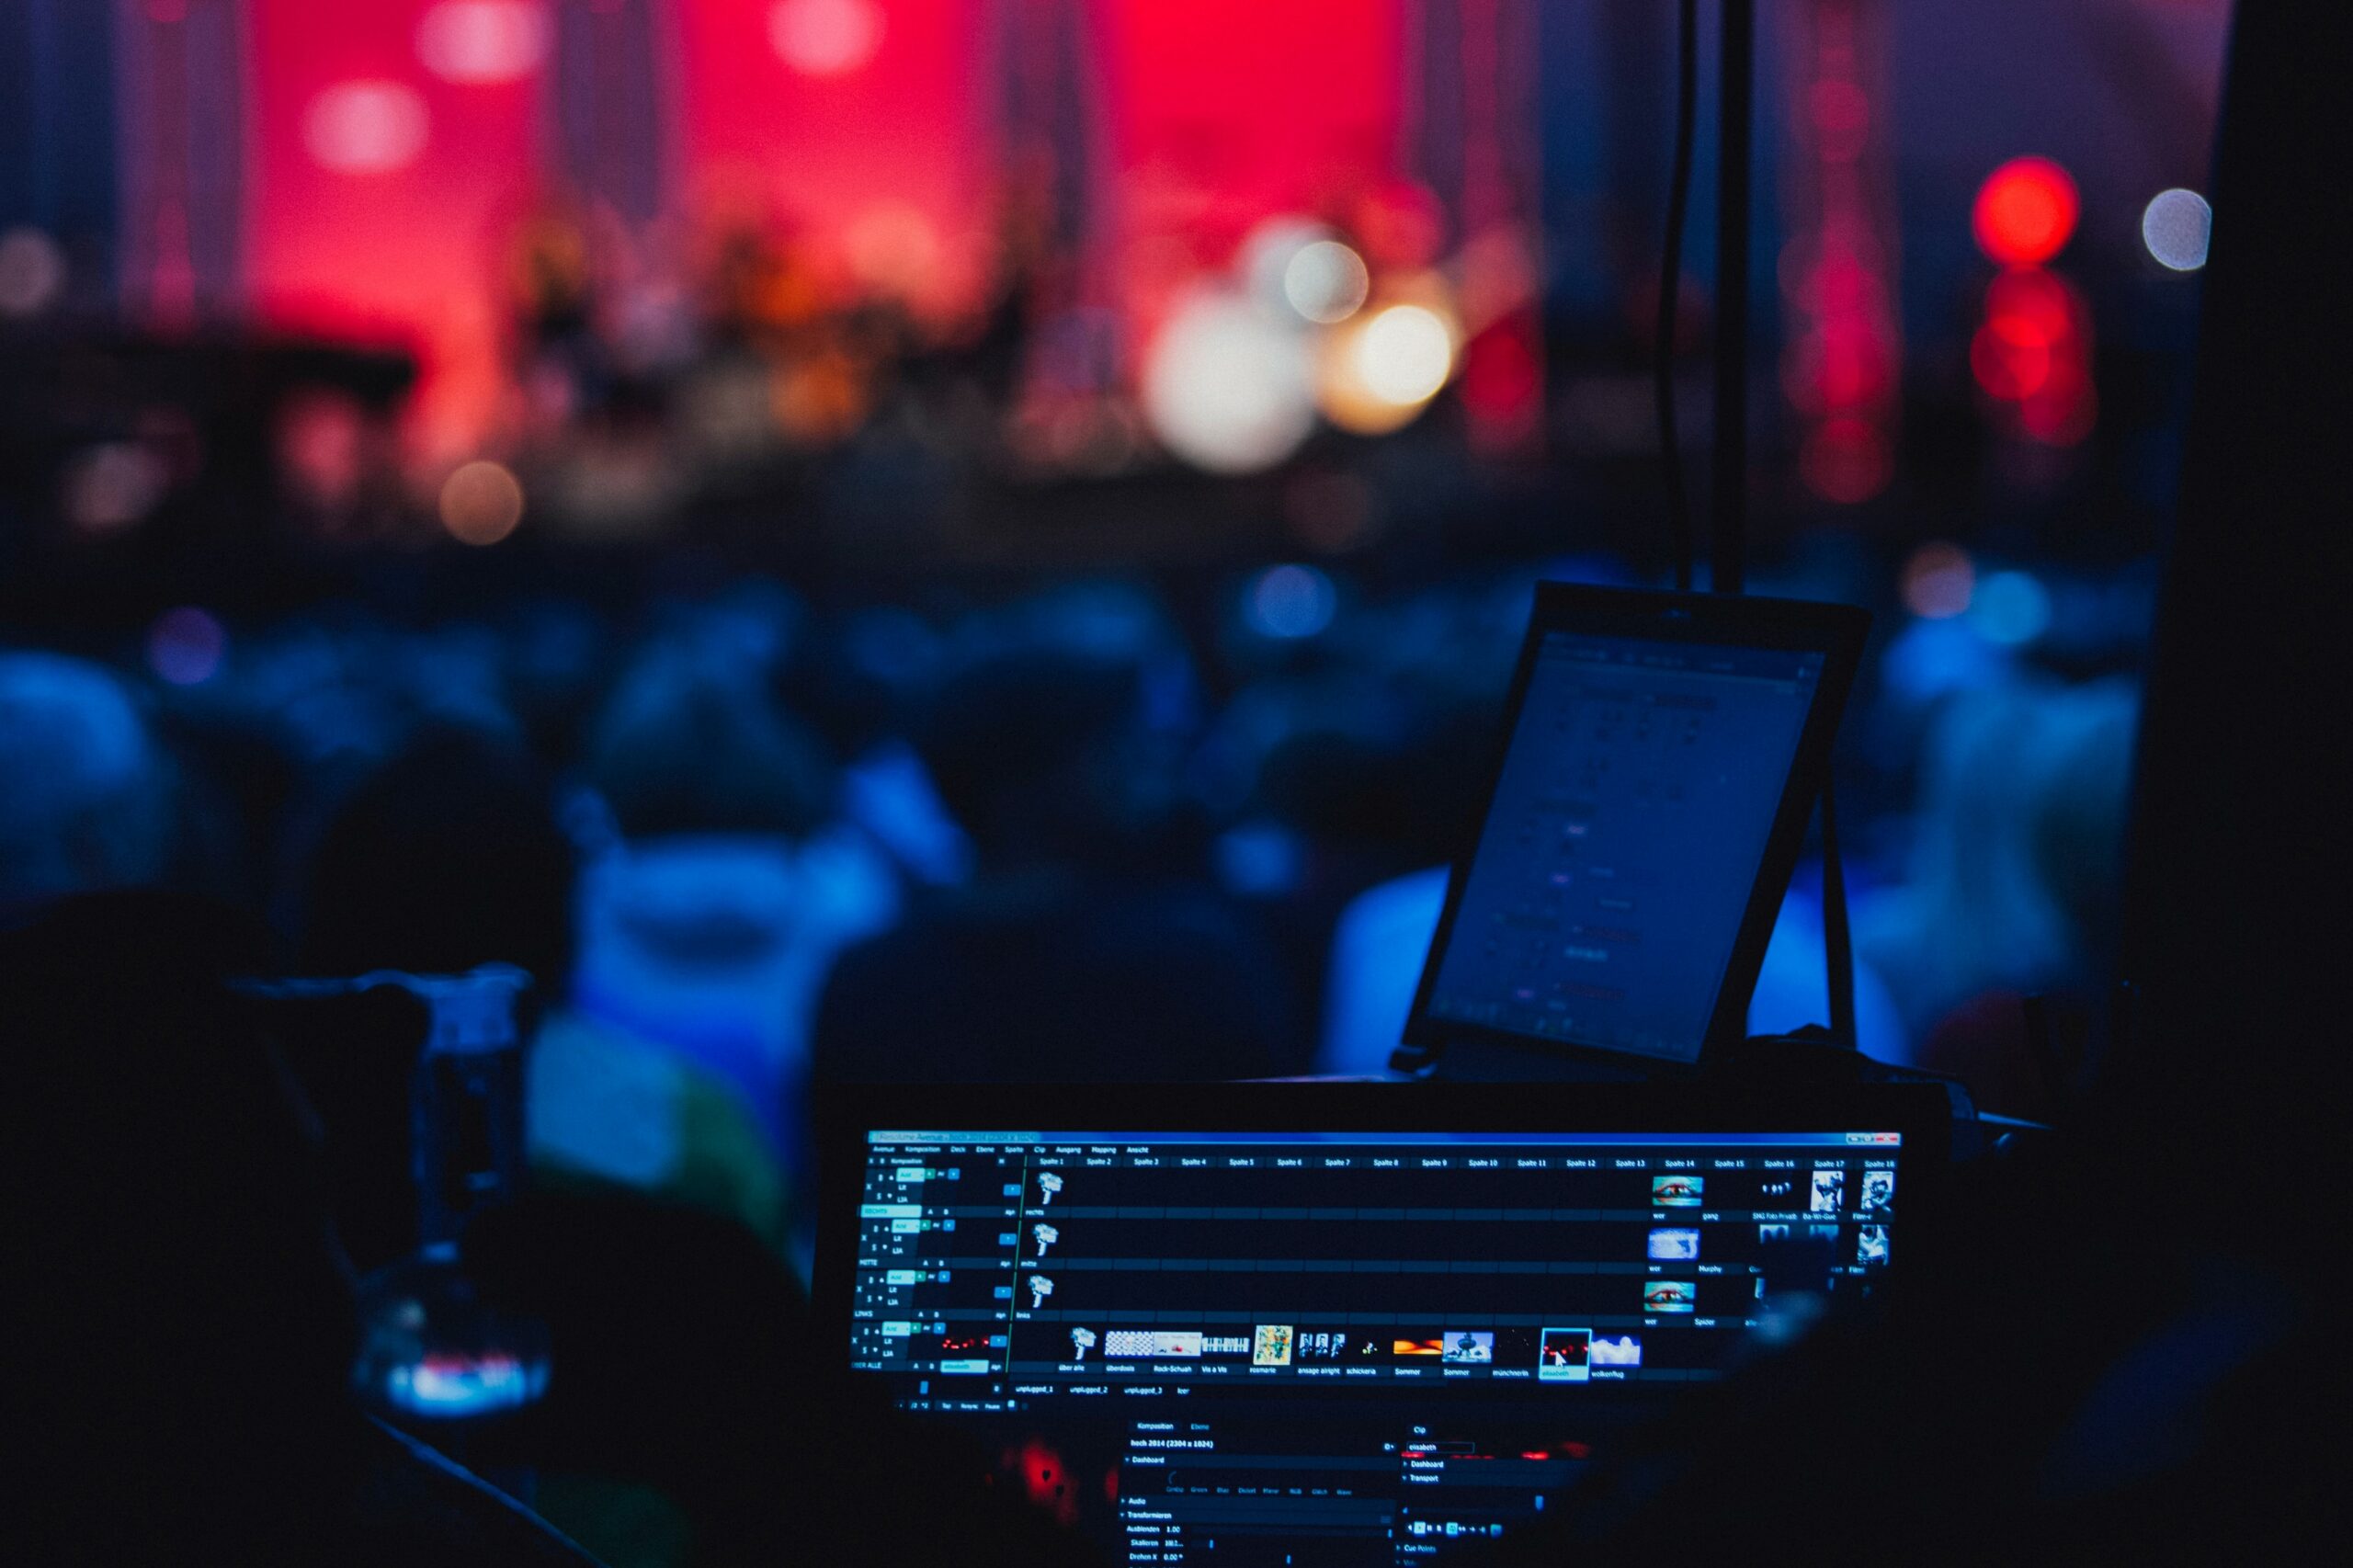 7 reasons why Hybrid Events will be the future of events